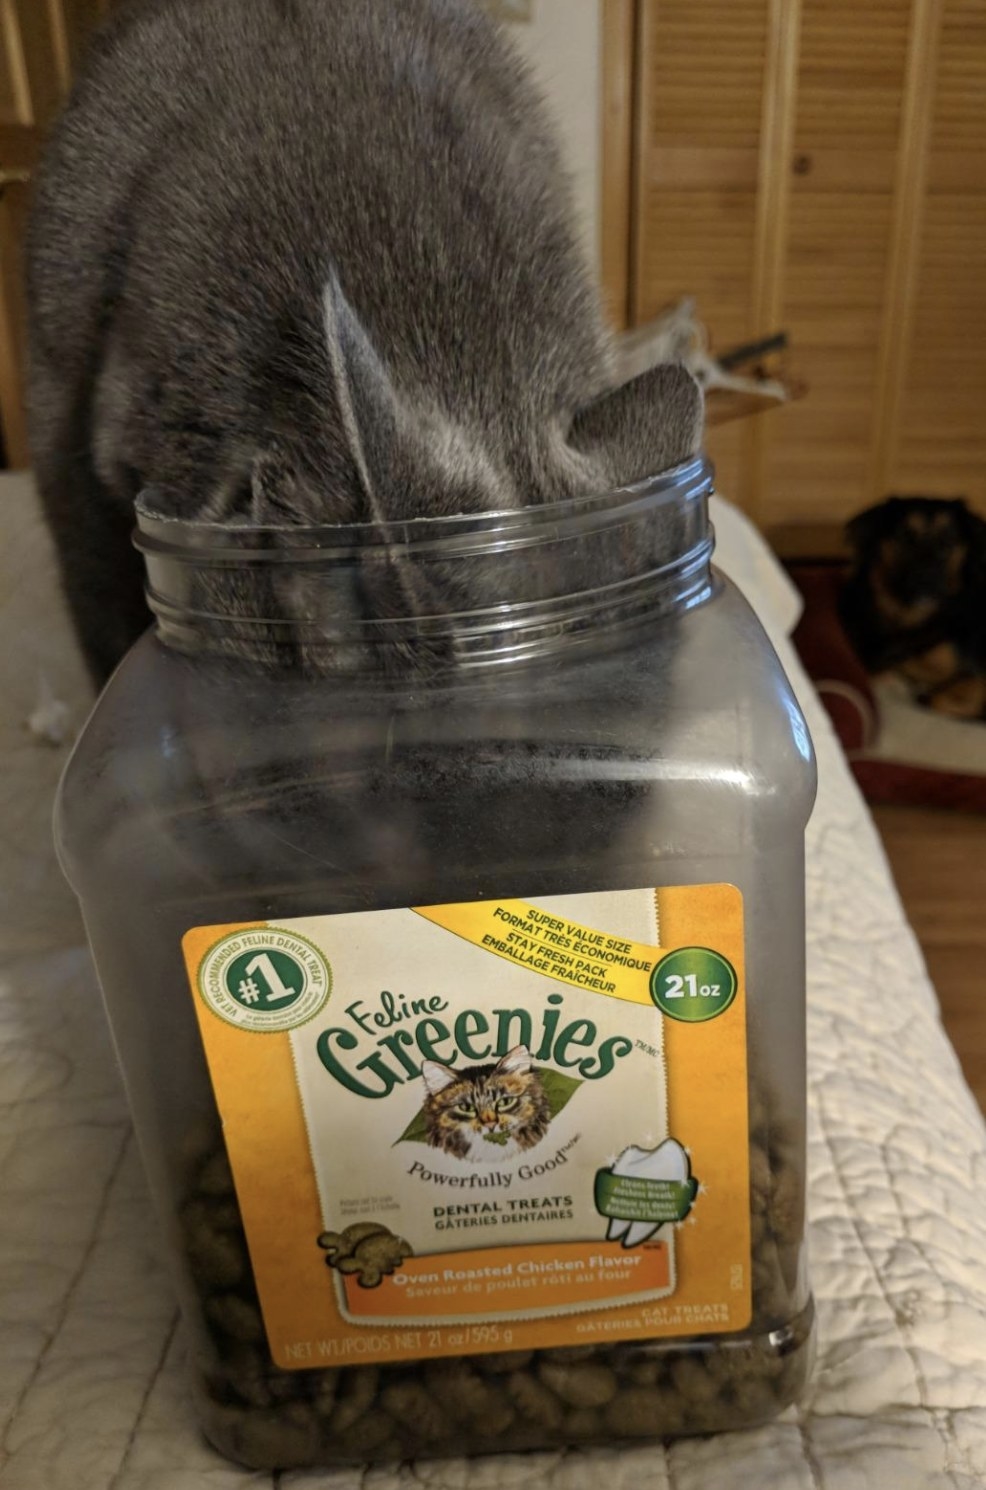 a grey cat with its head inside of a tub of greenies treats.